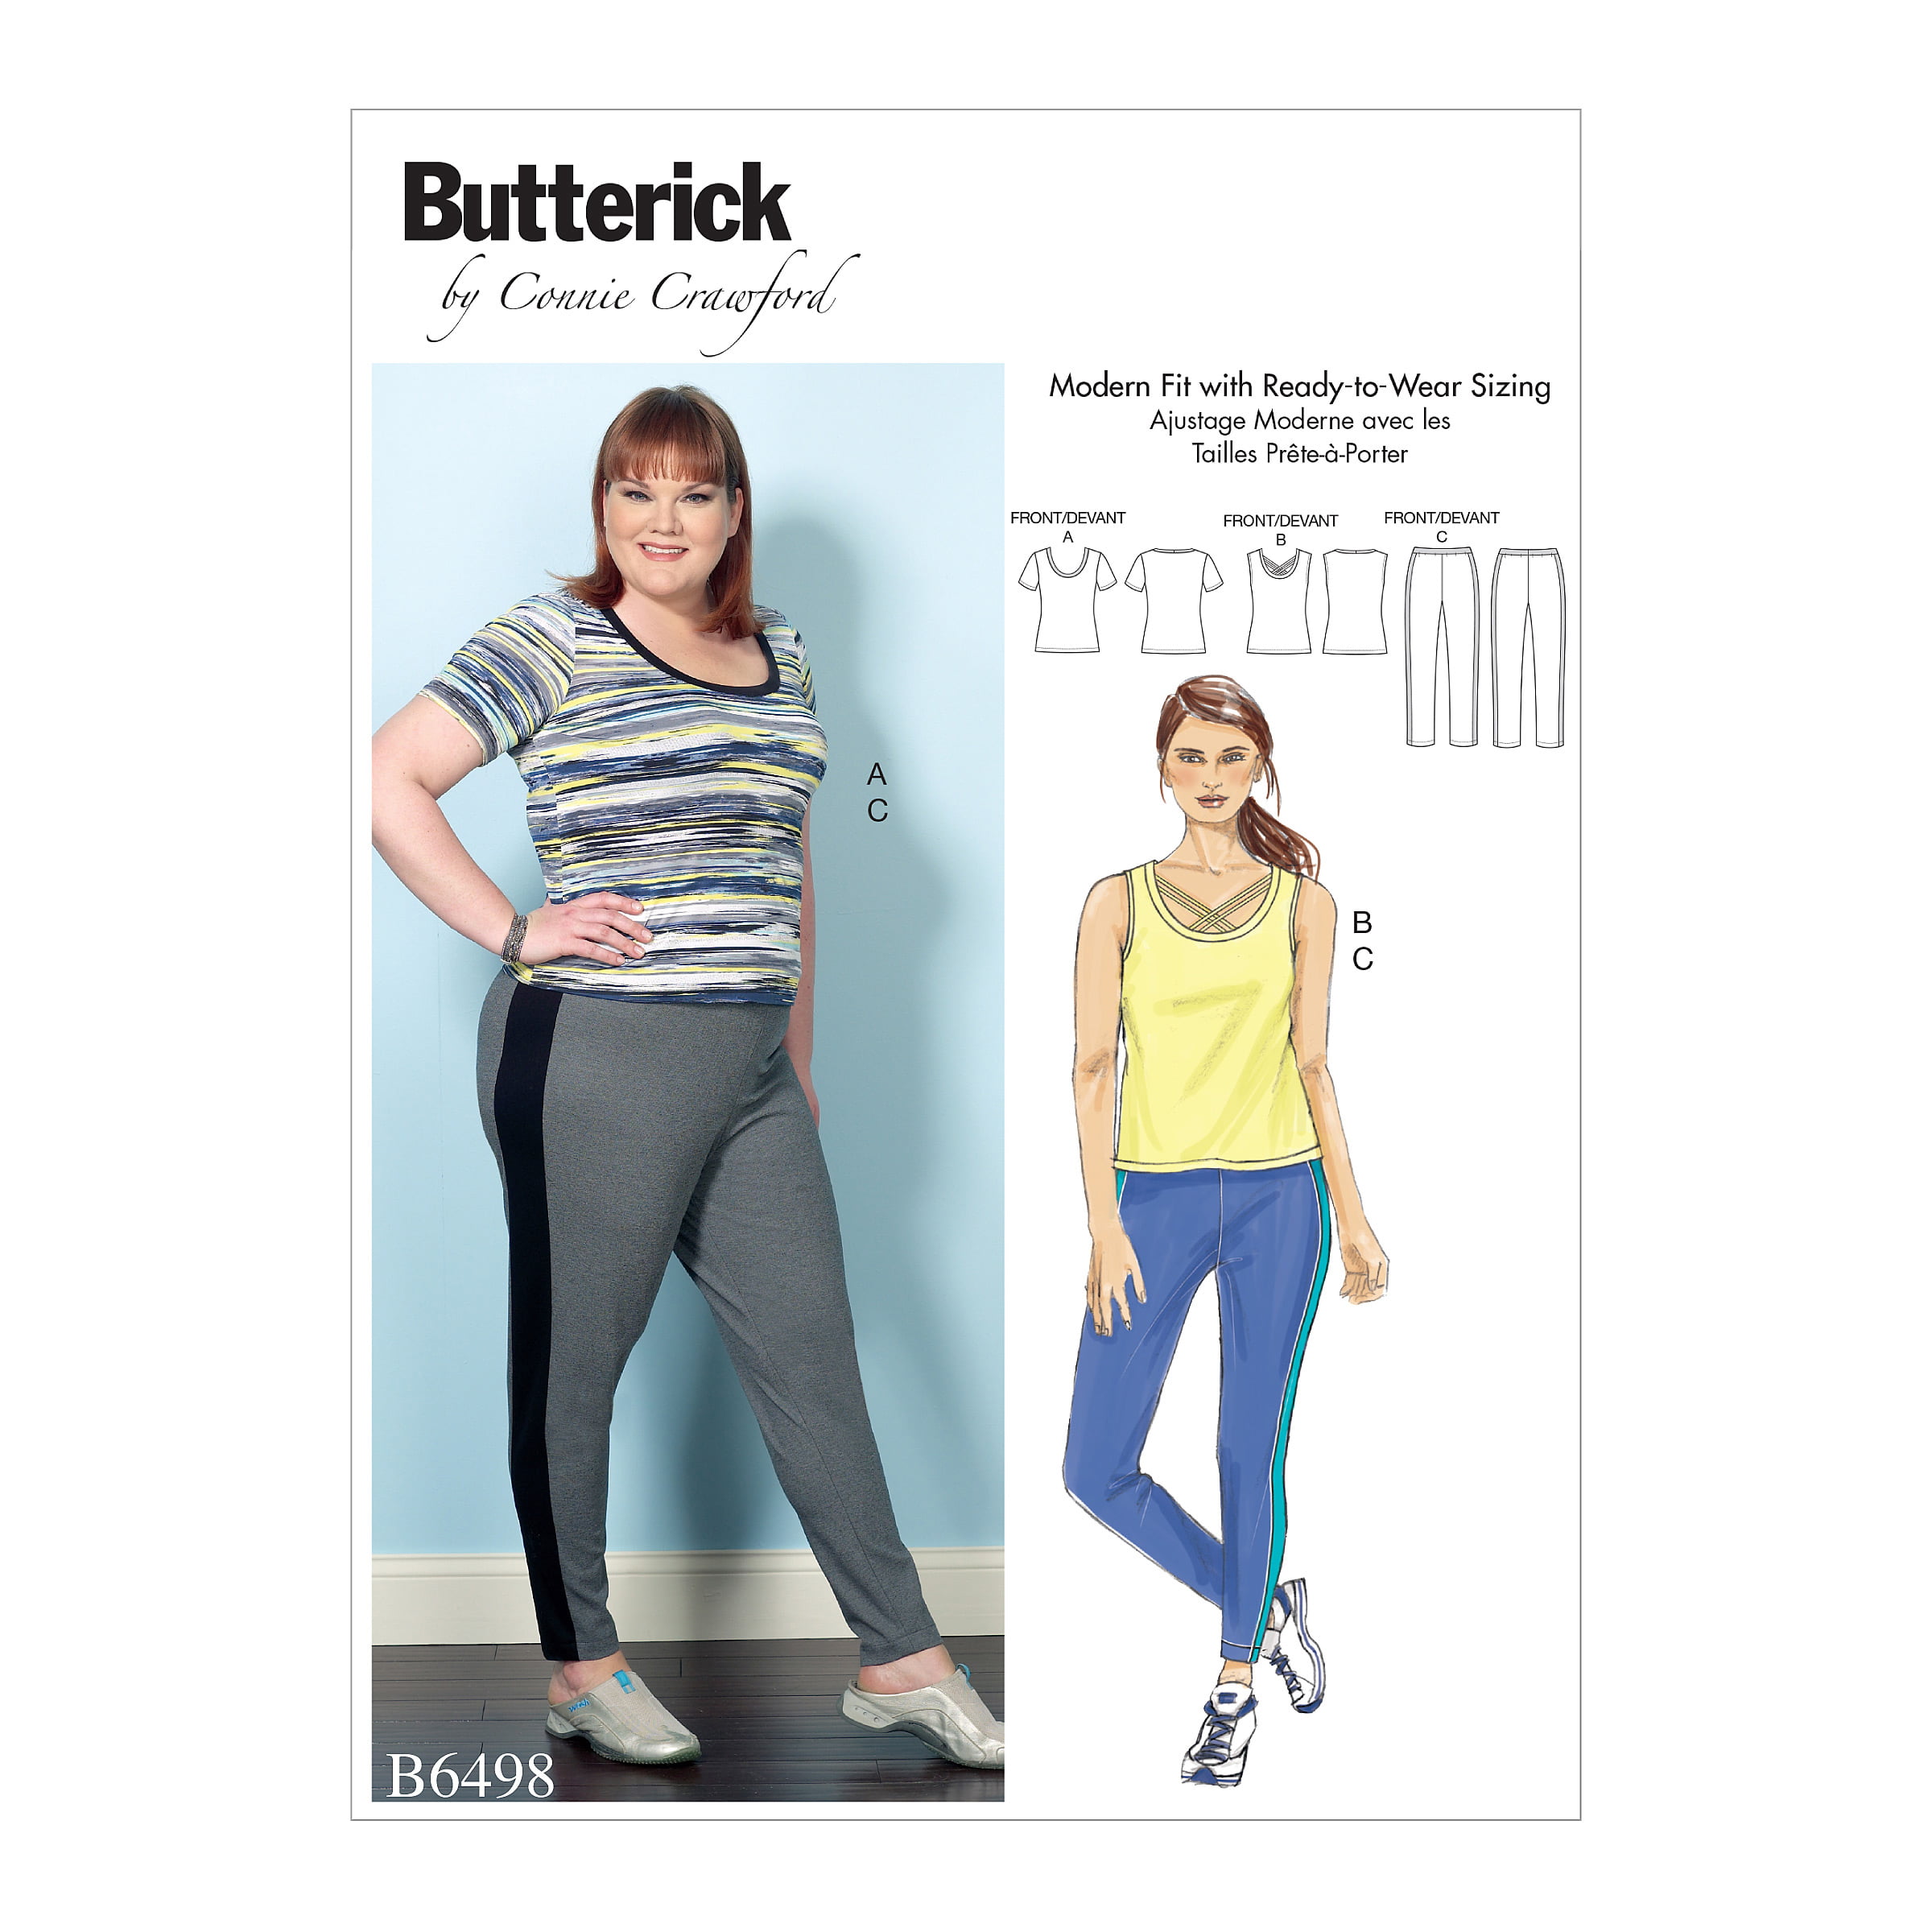 Amazon.com: Butterick Patterns B5963 Misses' Robe, Top, Gown, Pants and Bag Sewing  Templates, Size A5 (6-8-10-12-14) : Arts, Crafts & Sewing